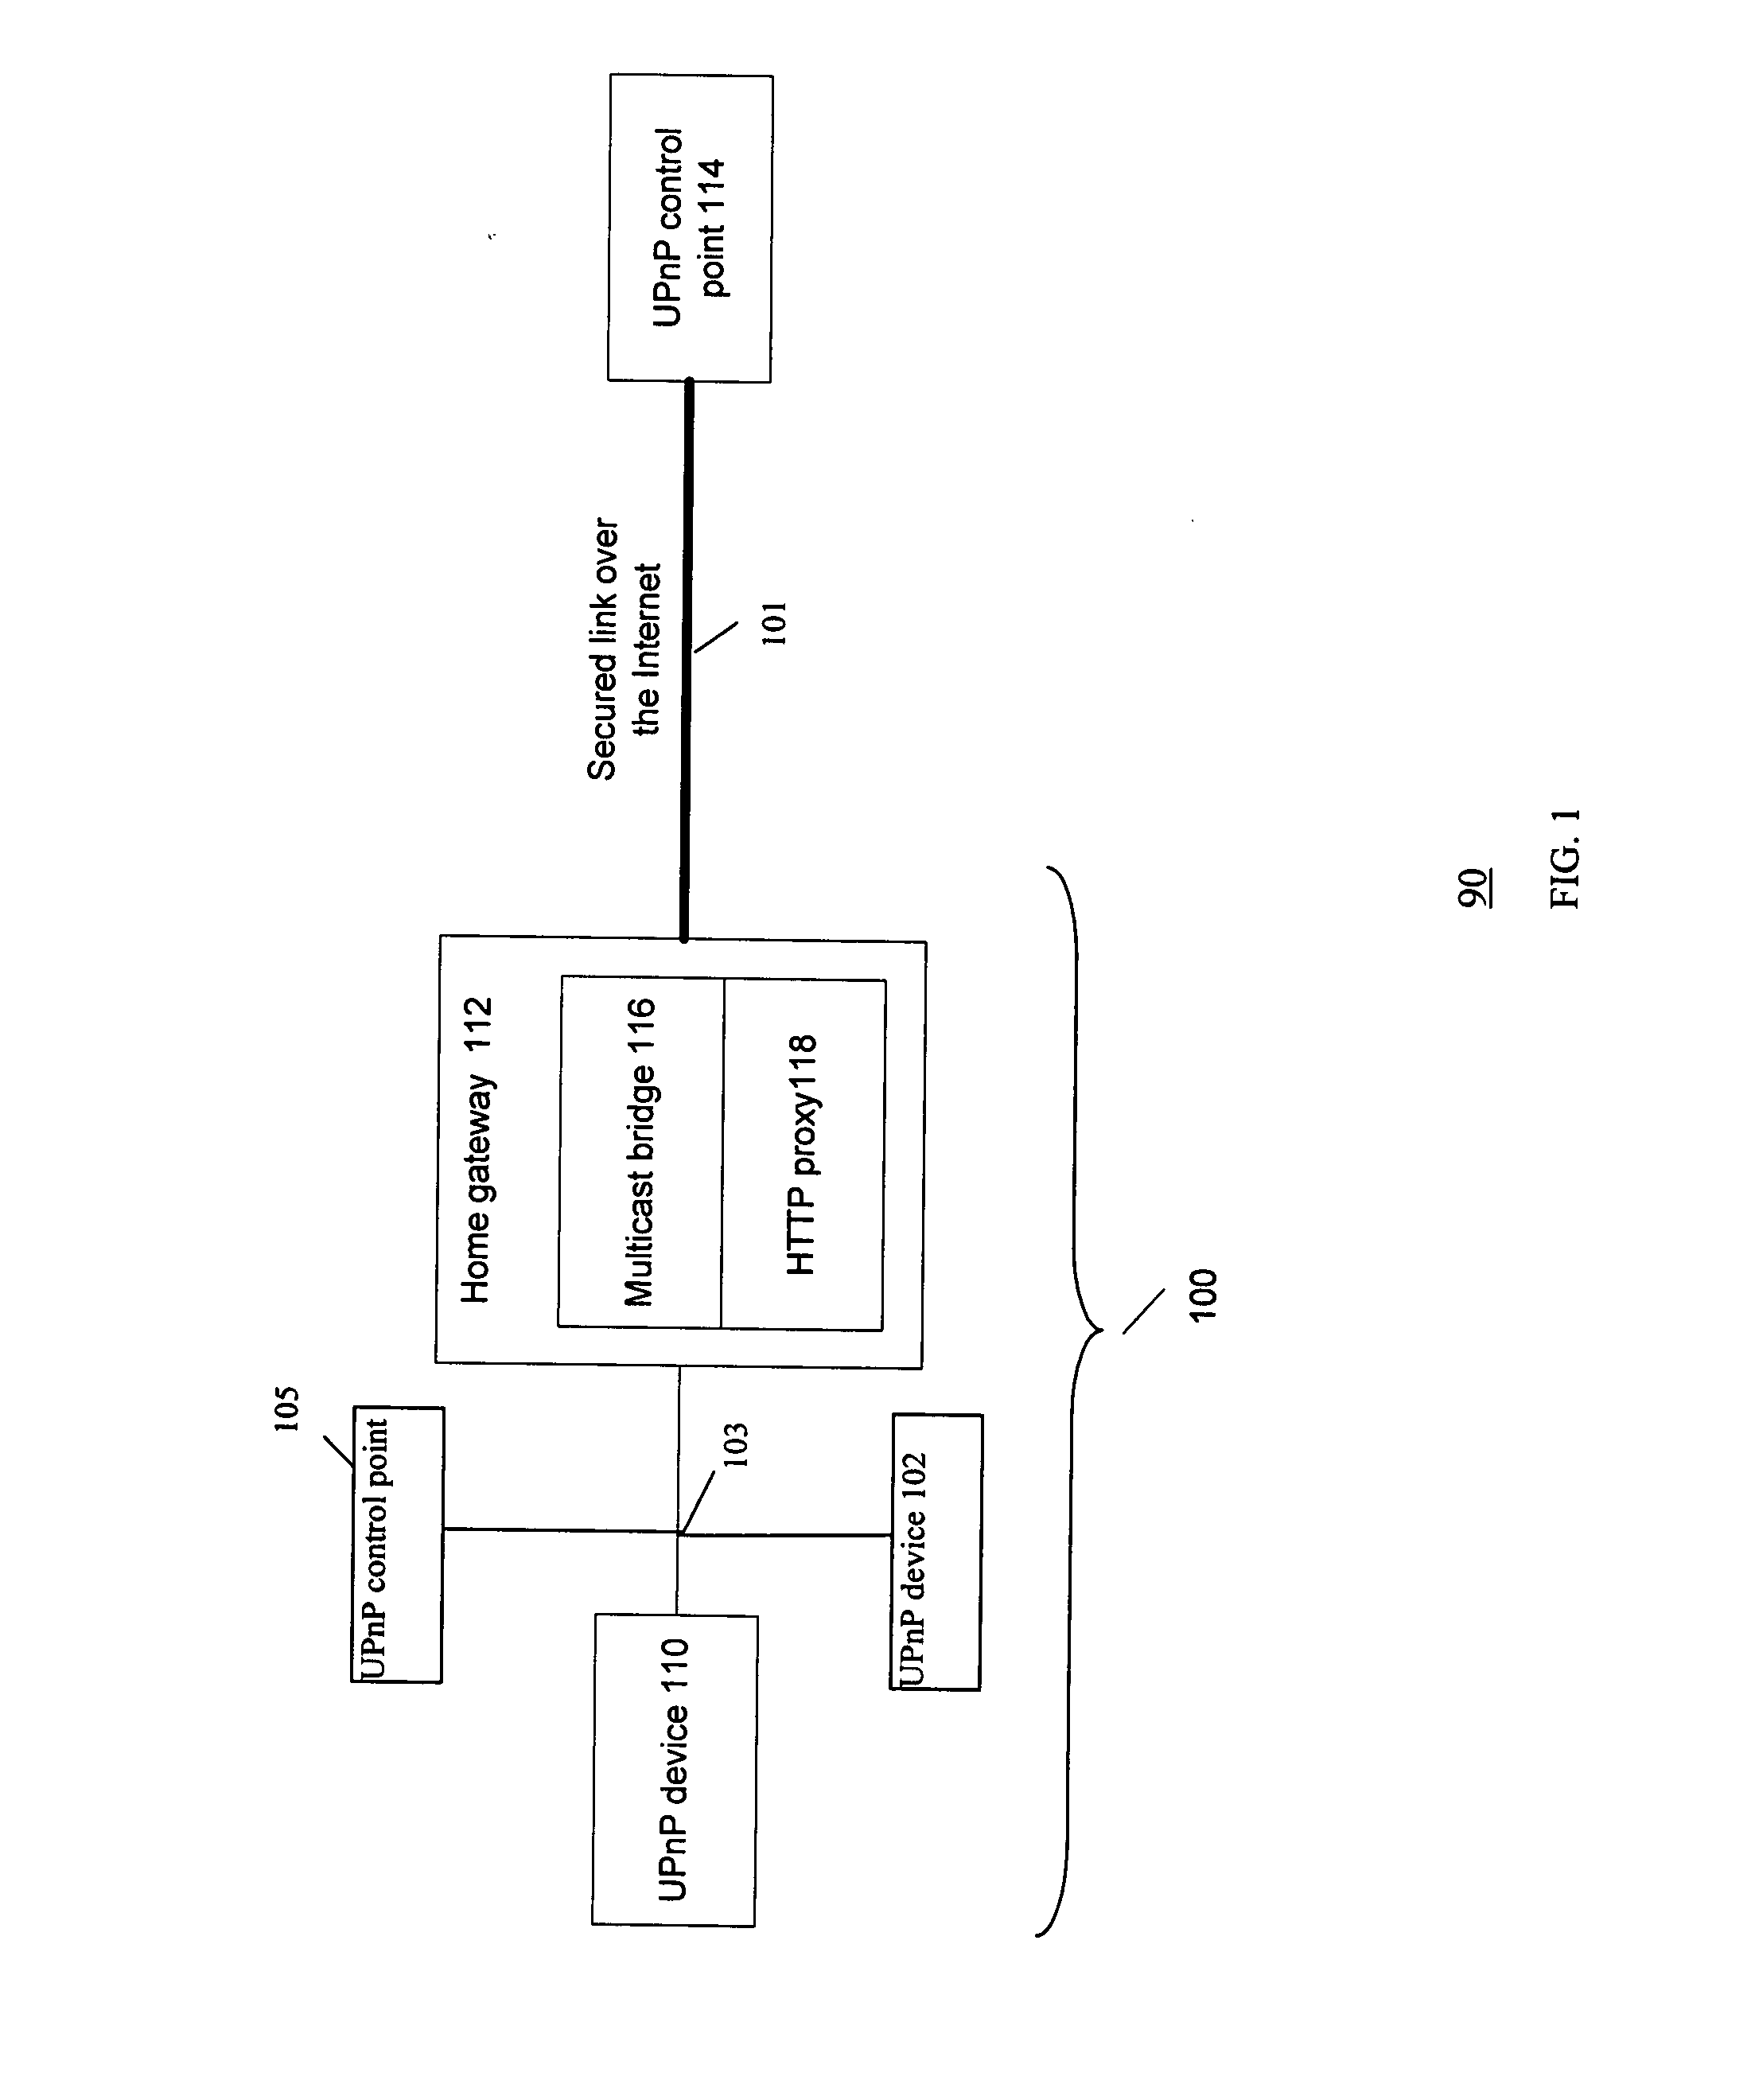 Method and system for remote access to universal plug and play devices